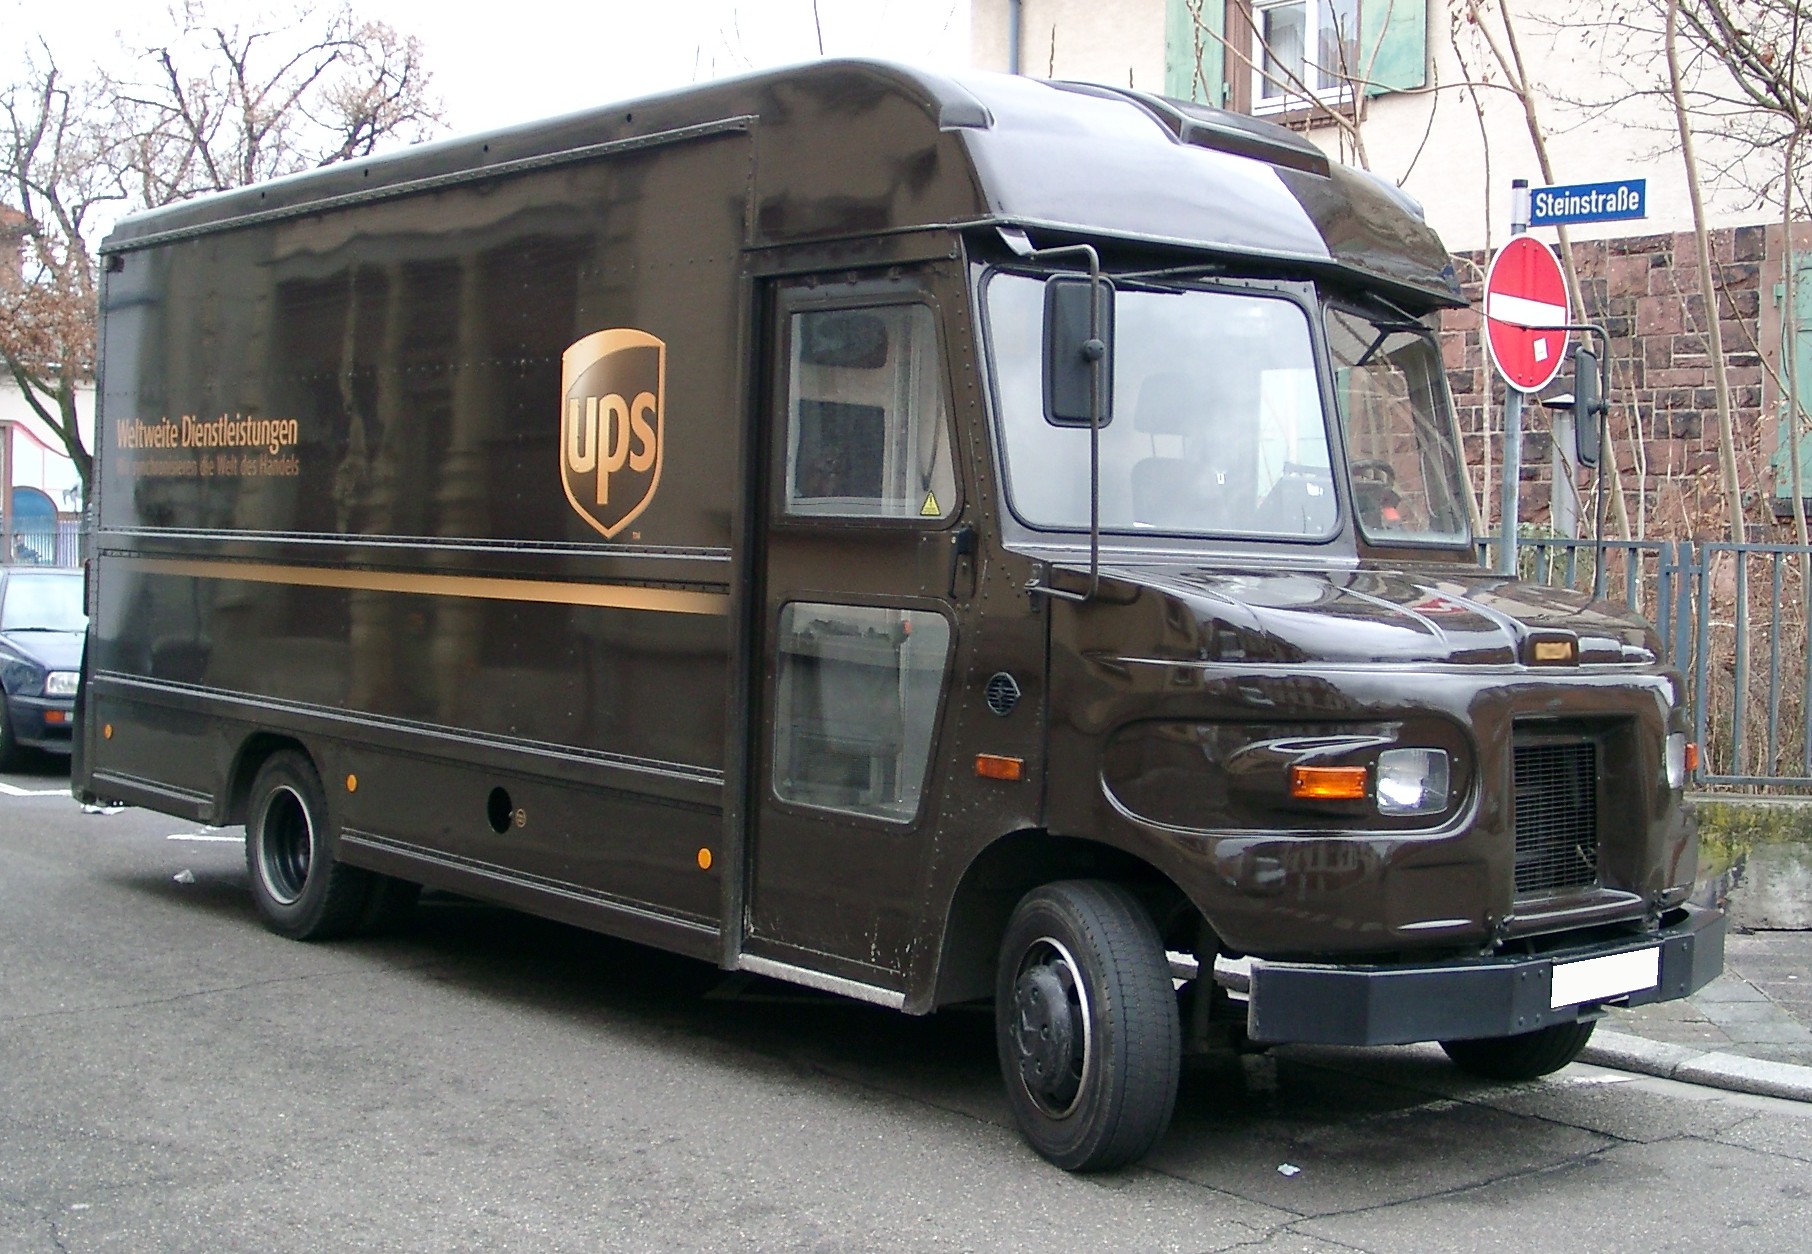 UPS Truck front 20080118